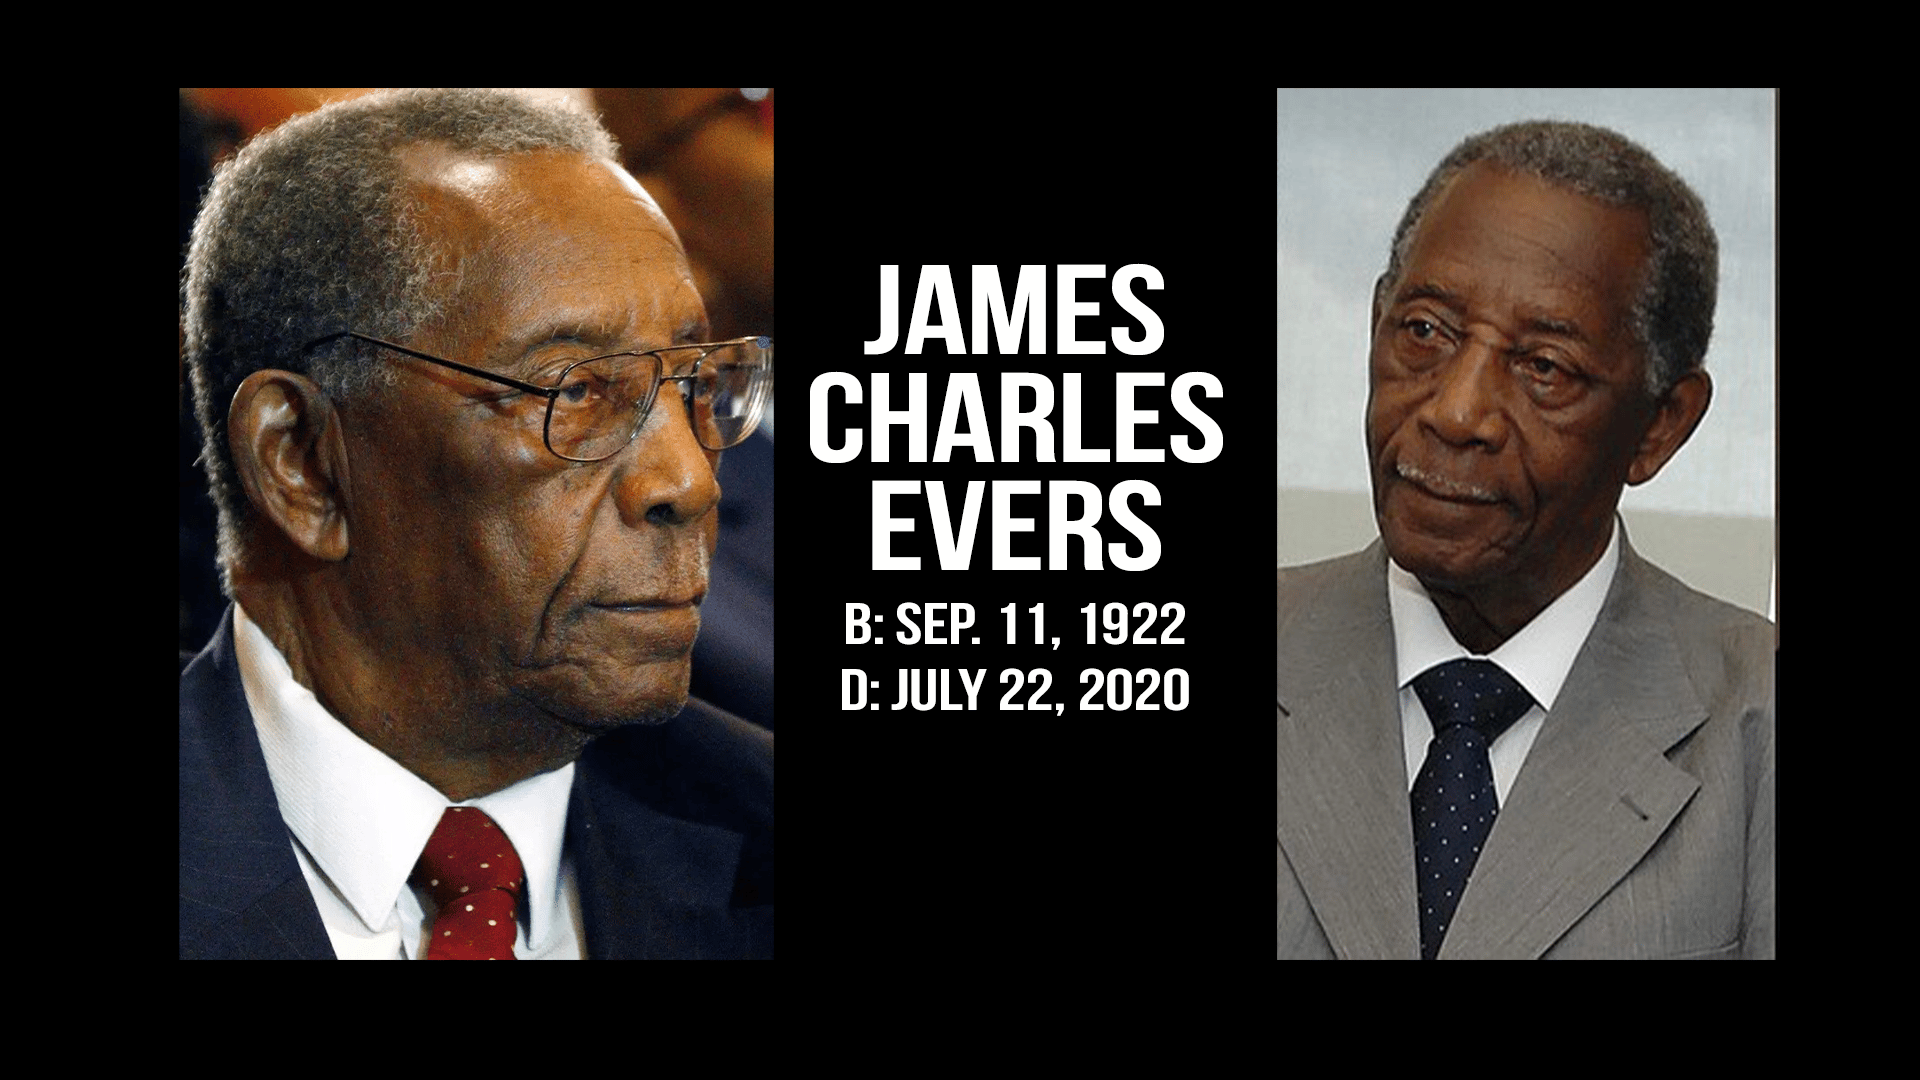 James Charles Evers historic sign